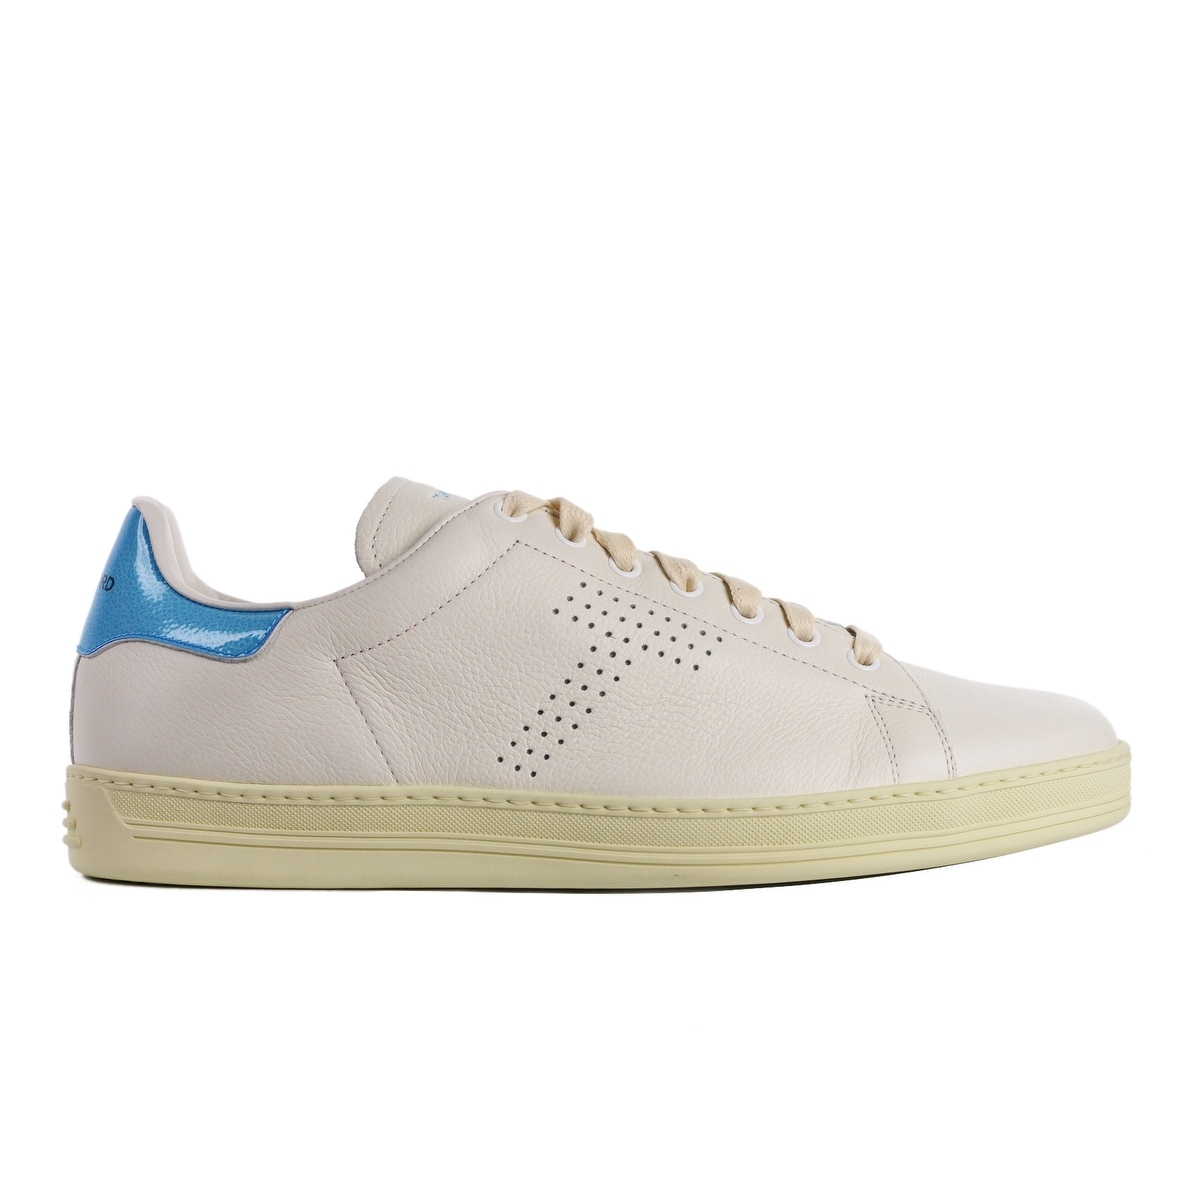 tom ford sneakers white